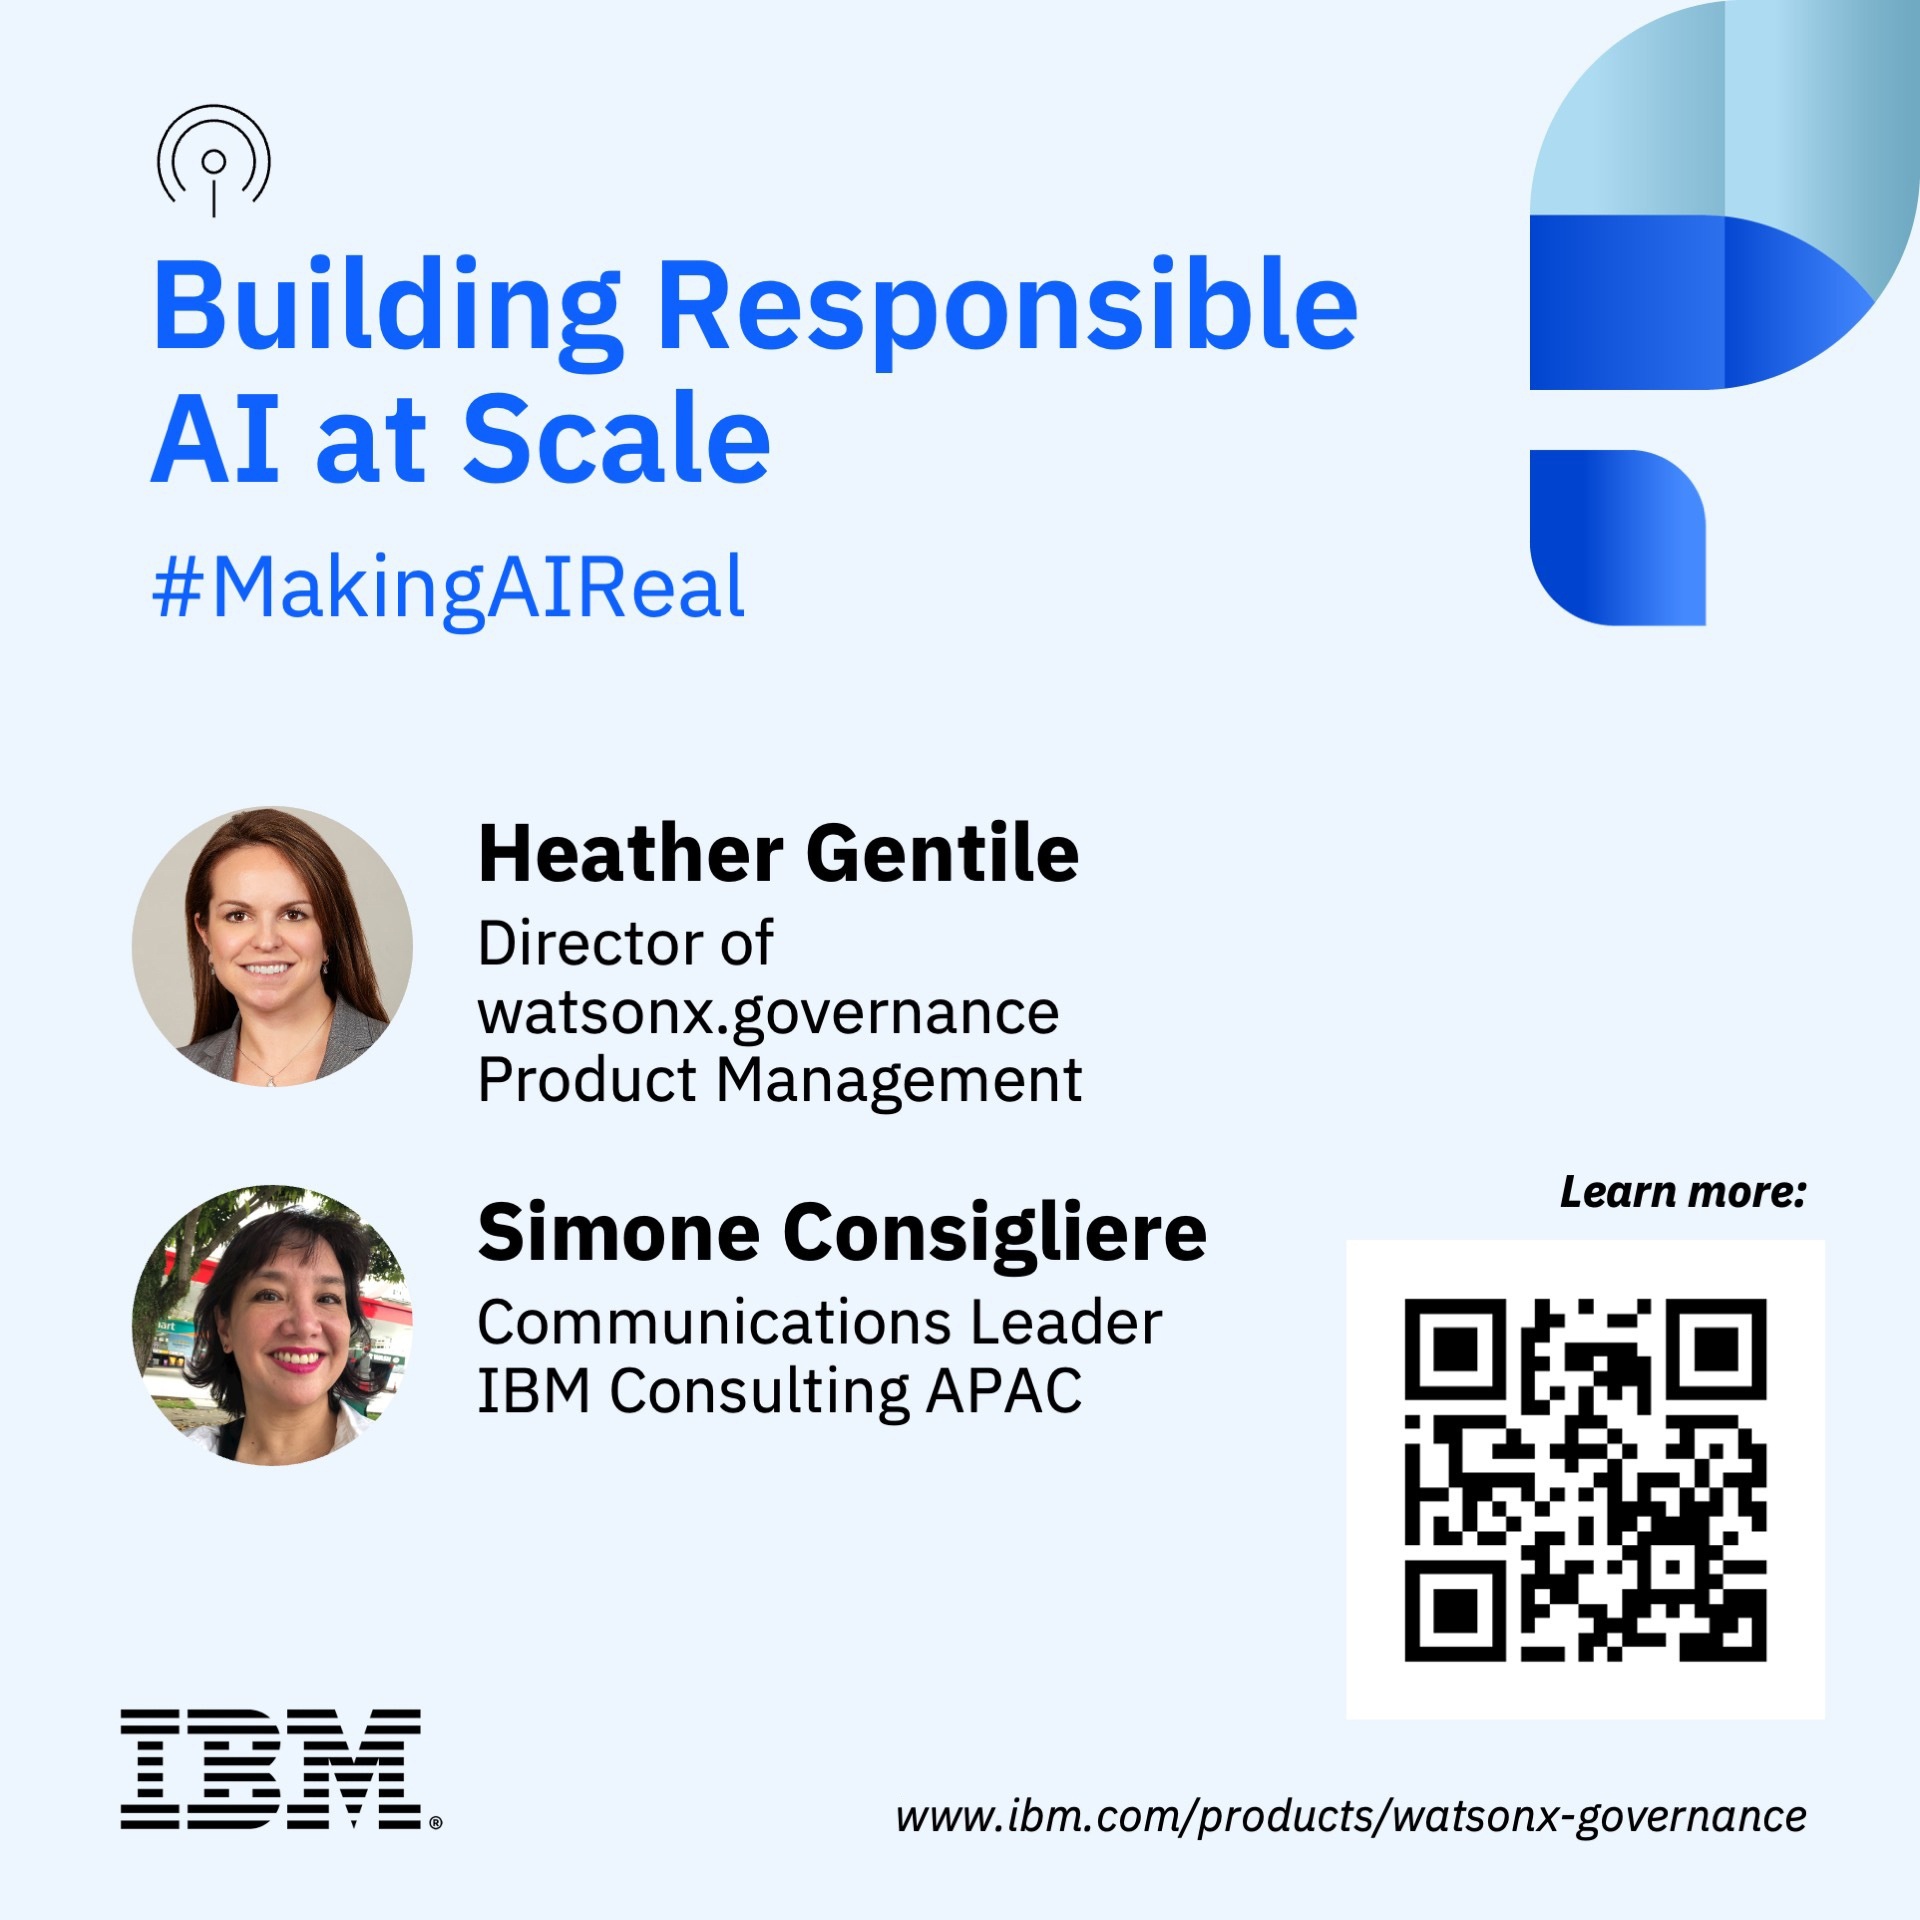 Building Responsible AI at Scale